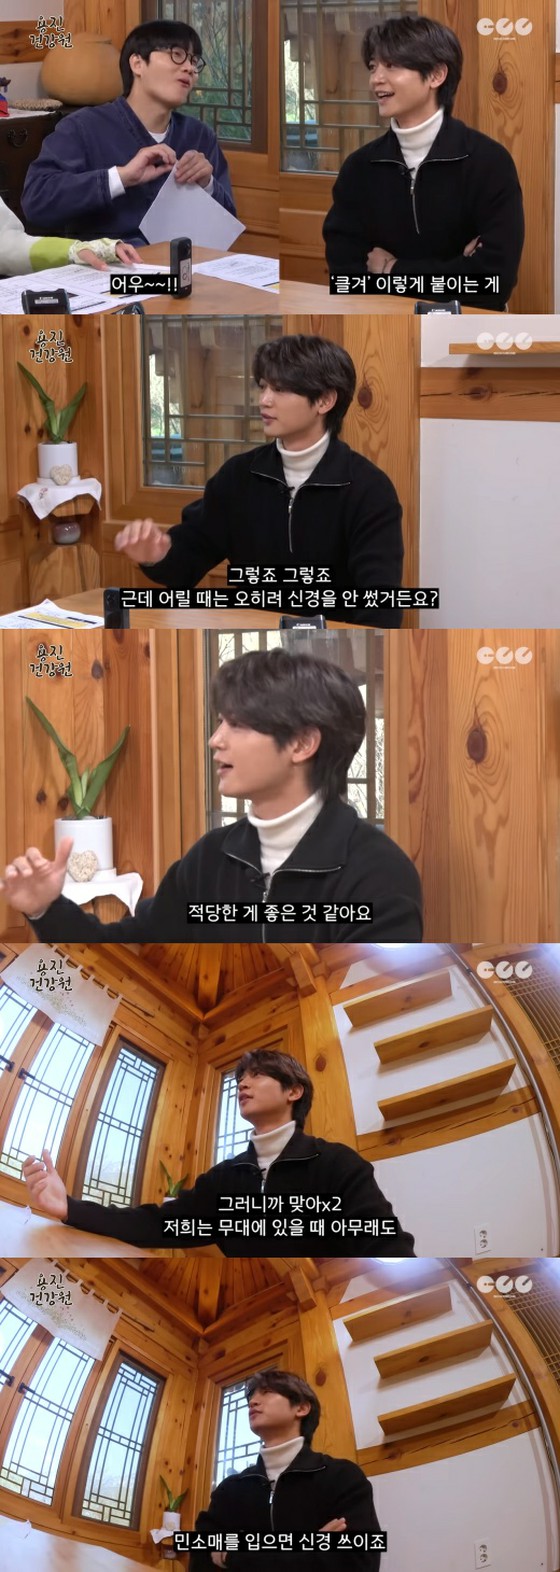 Minho (SHINee) agrees with Key about armpit hair removal "moderation is good"